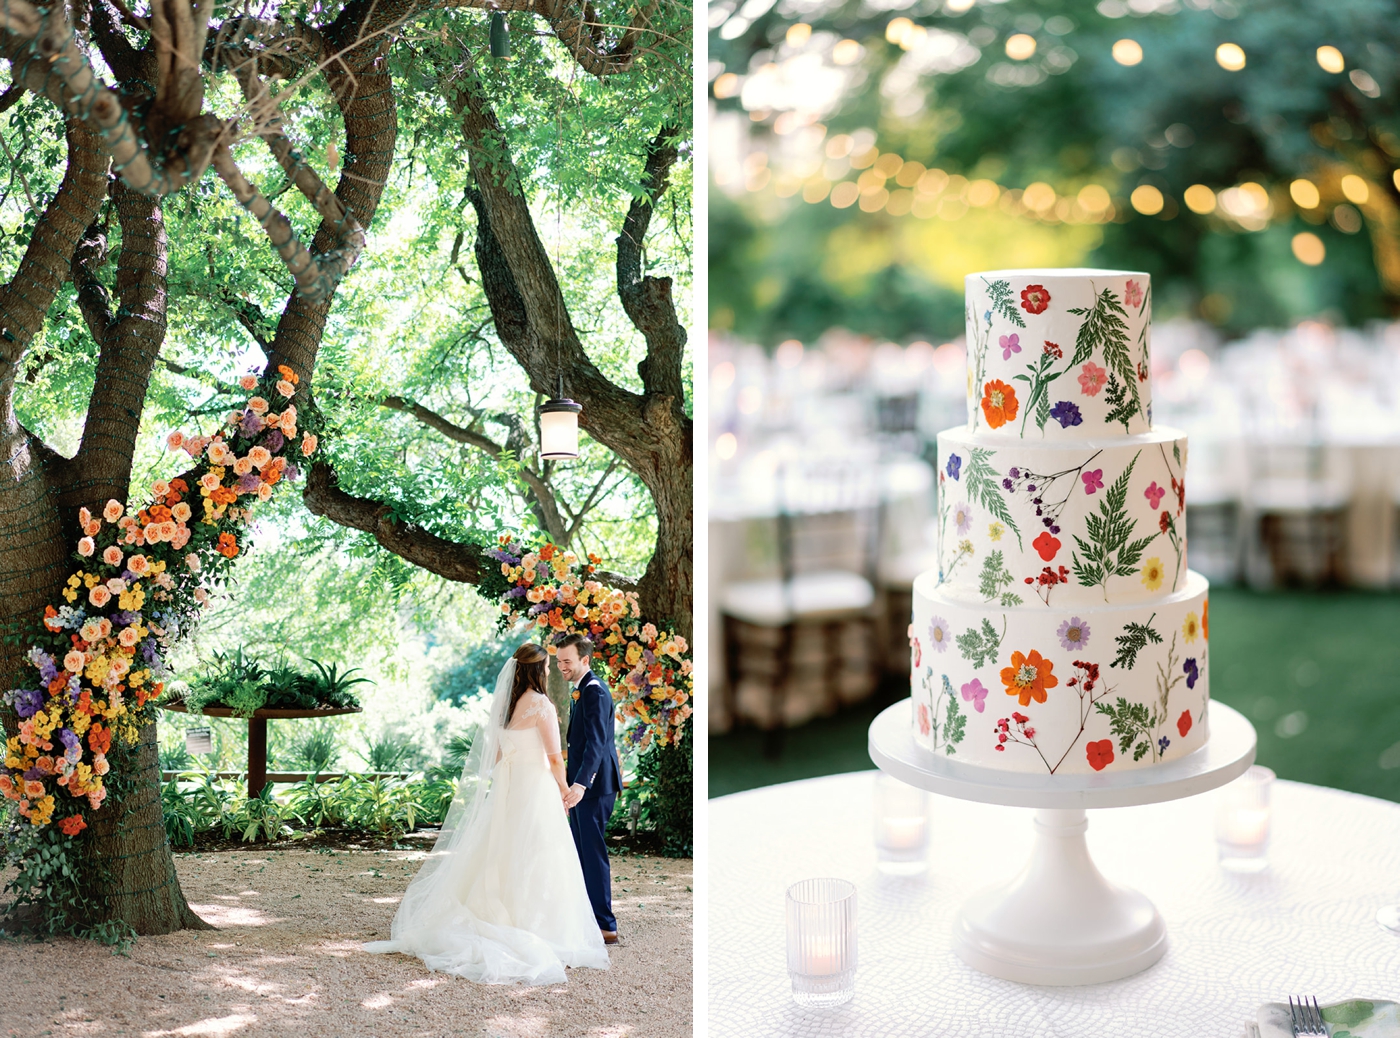 Colorful outdoor wedding in Austin, Texas